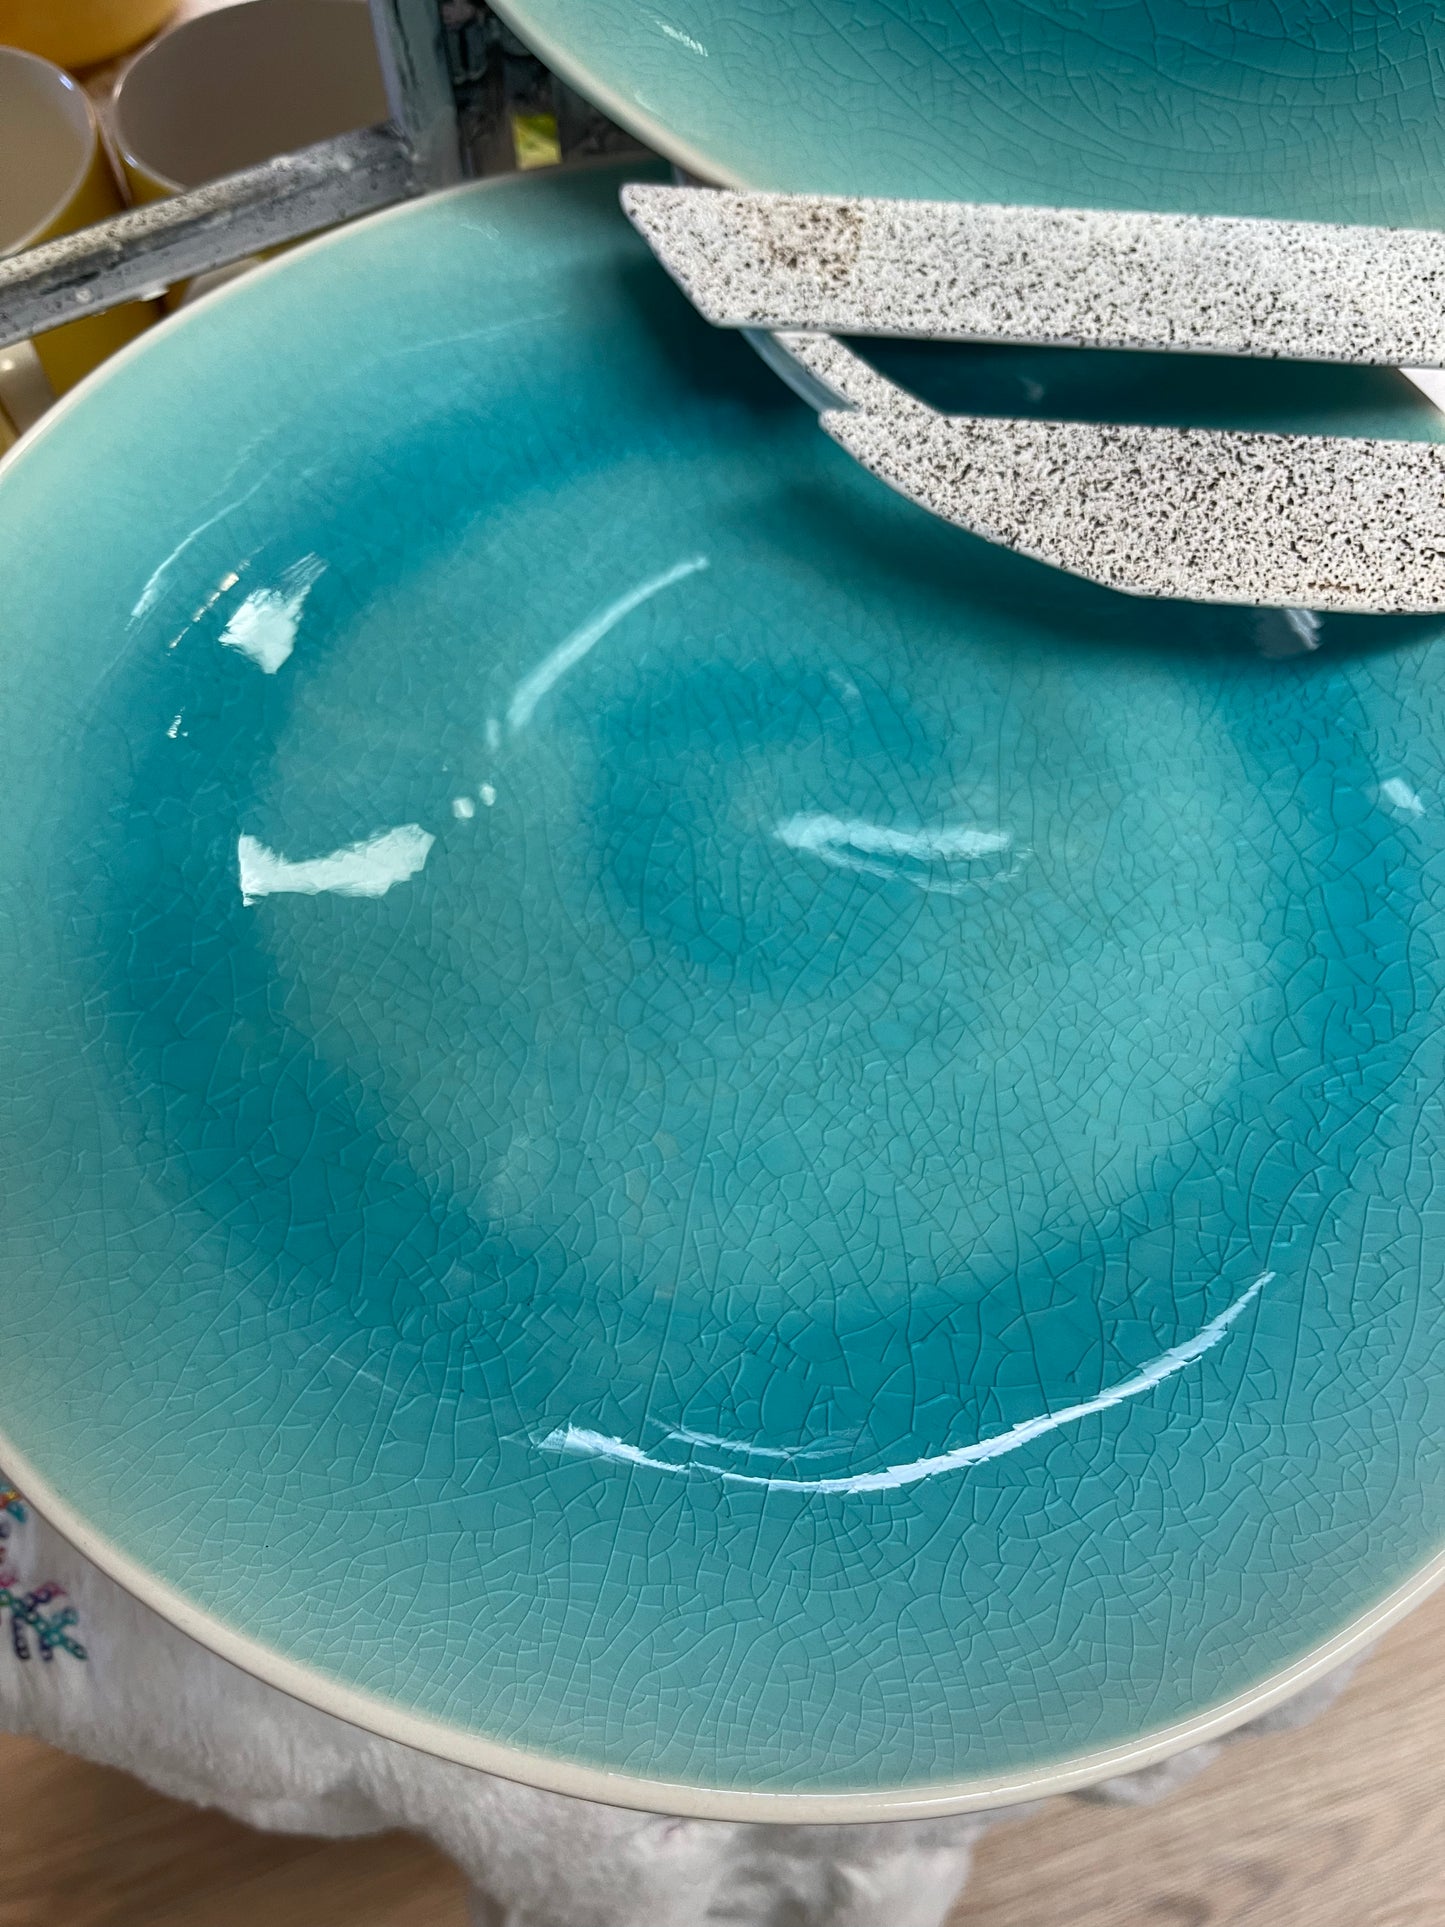 Nicole Miller Home Crackle  Dinner Plates Turquoise Blue no chips set of 8